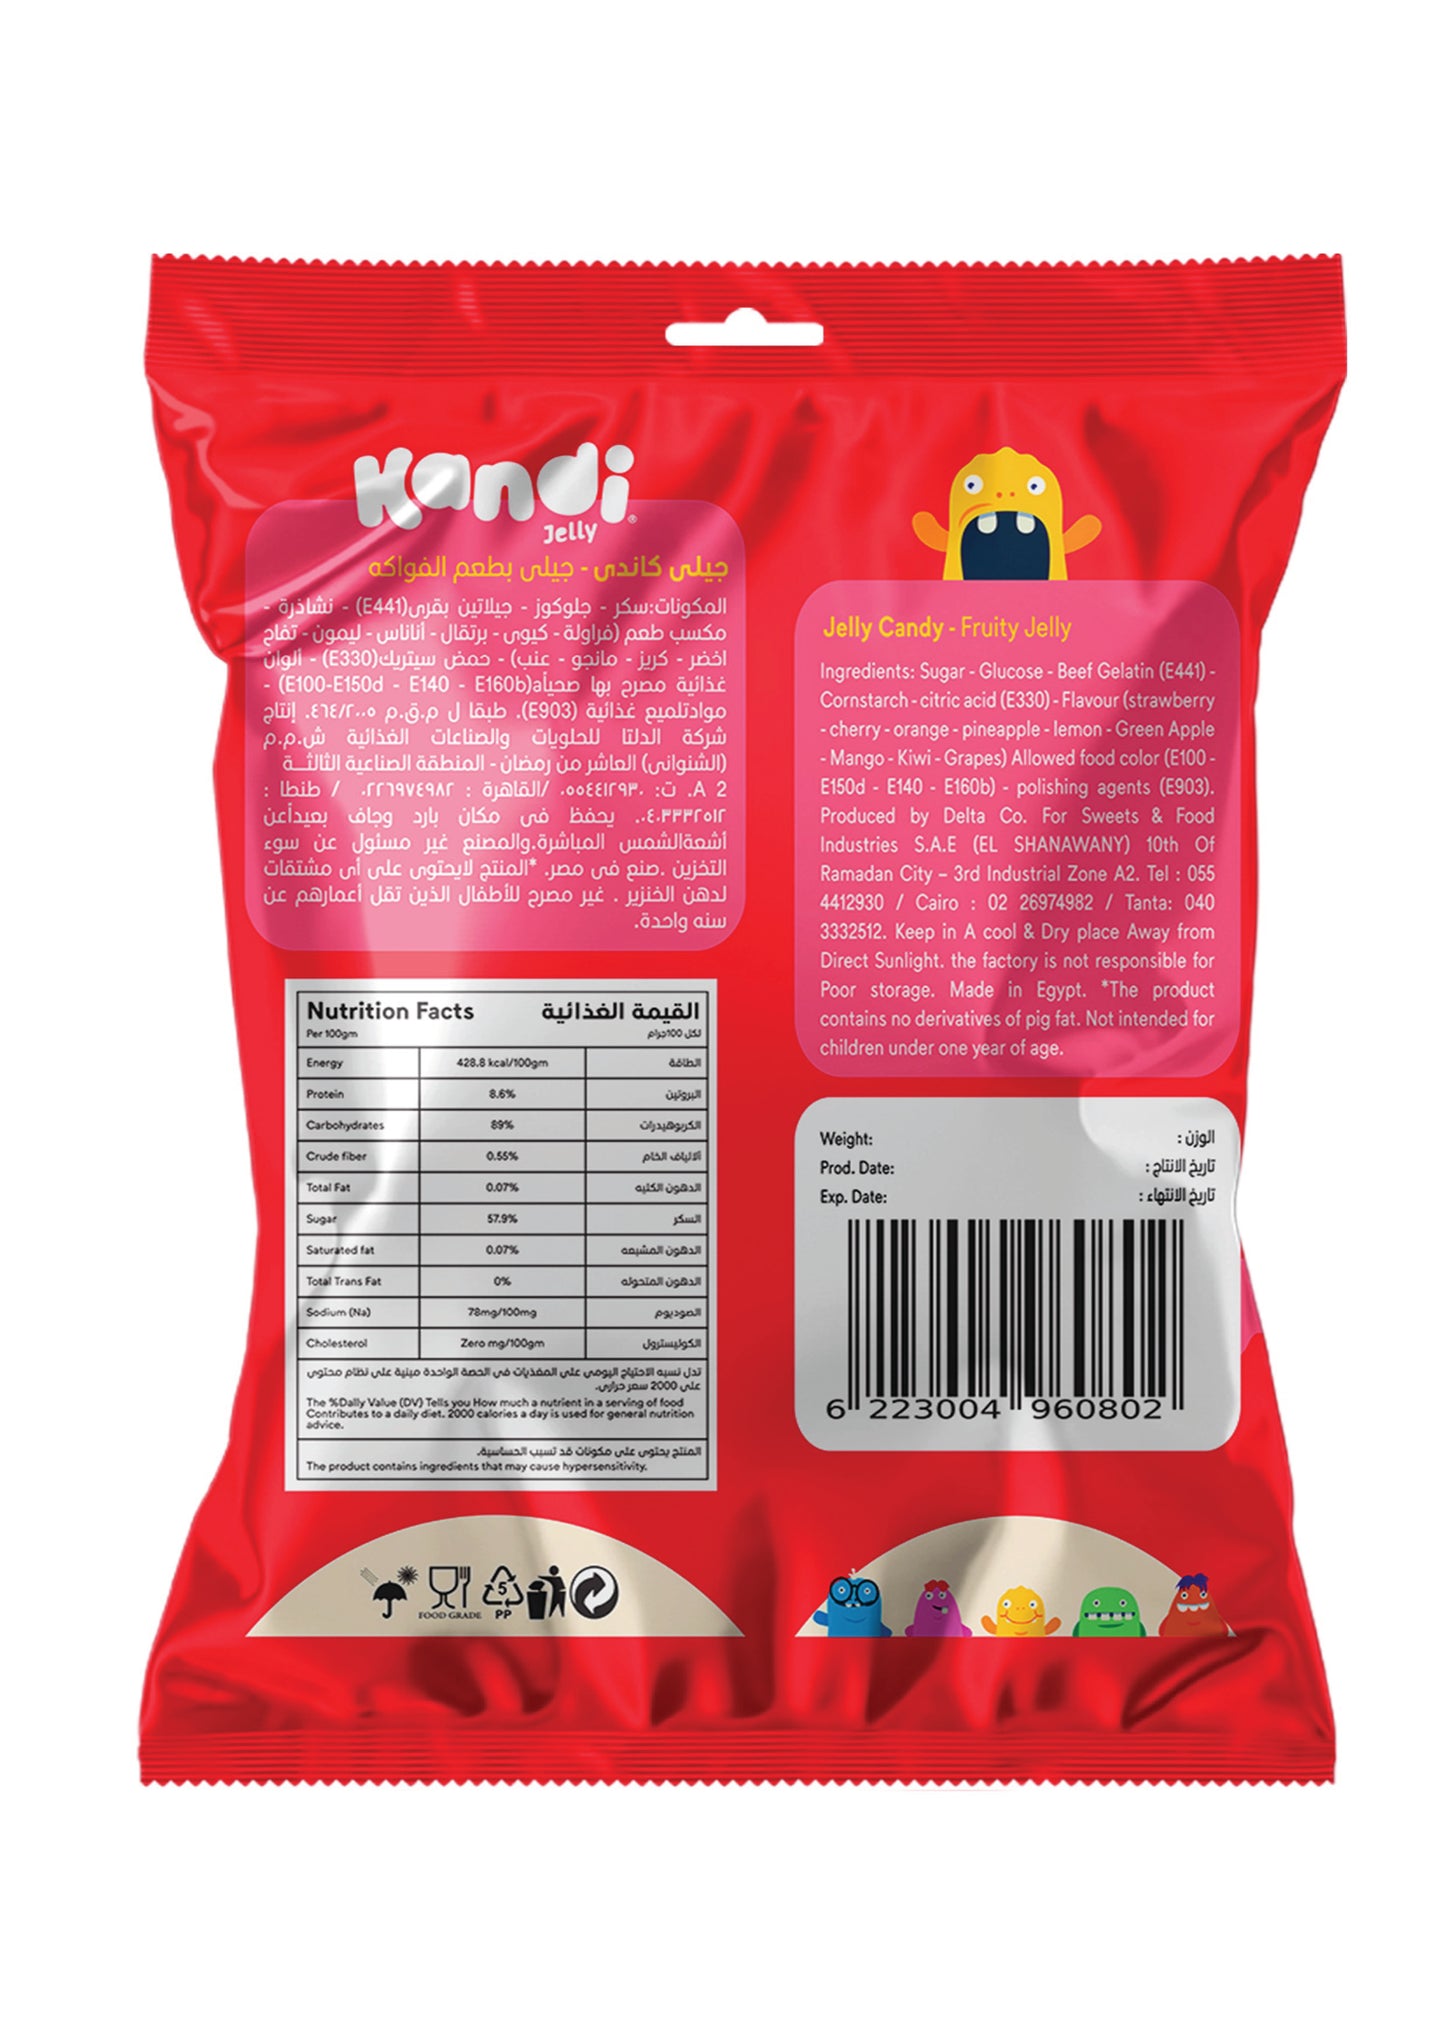 Halal Jelly Kandi | Authentic Egyptian Jelly Kandi | Set of 8 Bags (60g Each) - Total 480g (1.05 lbs) | 4 Exciting Flavors: (Crazy Cola, Yummy Bears, Lucky Crocky, Nerdy Worms) جيلي حلوى حلال